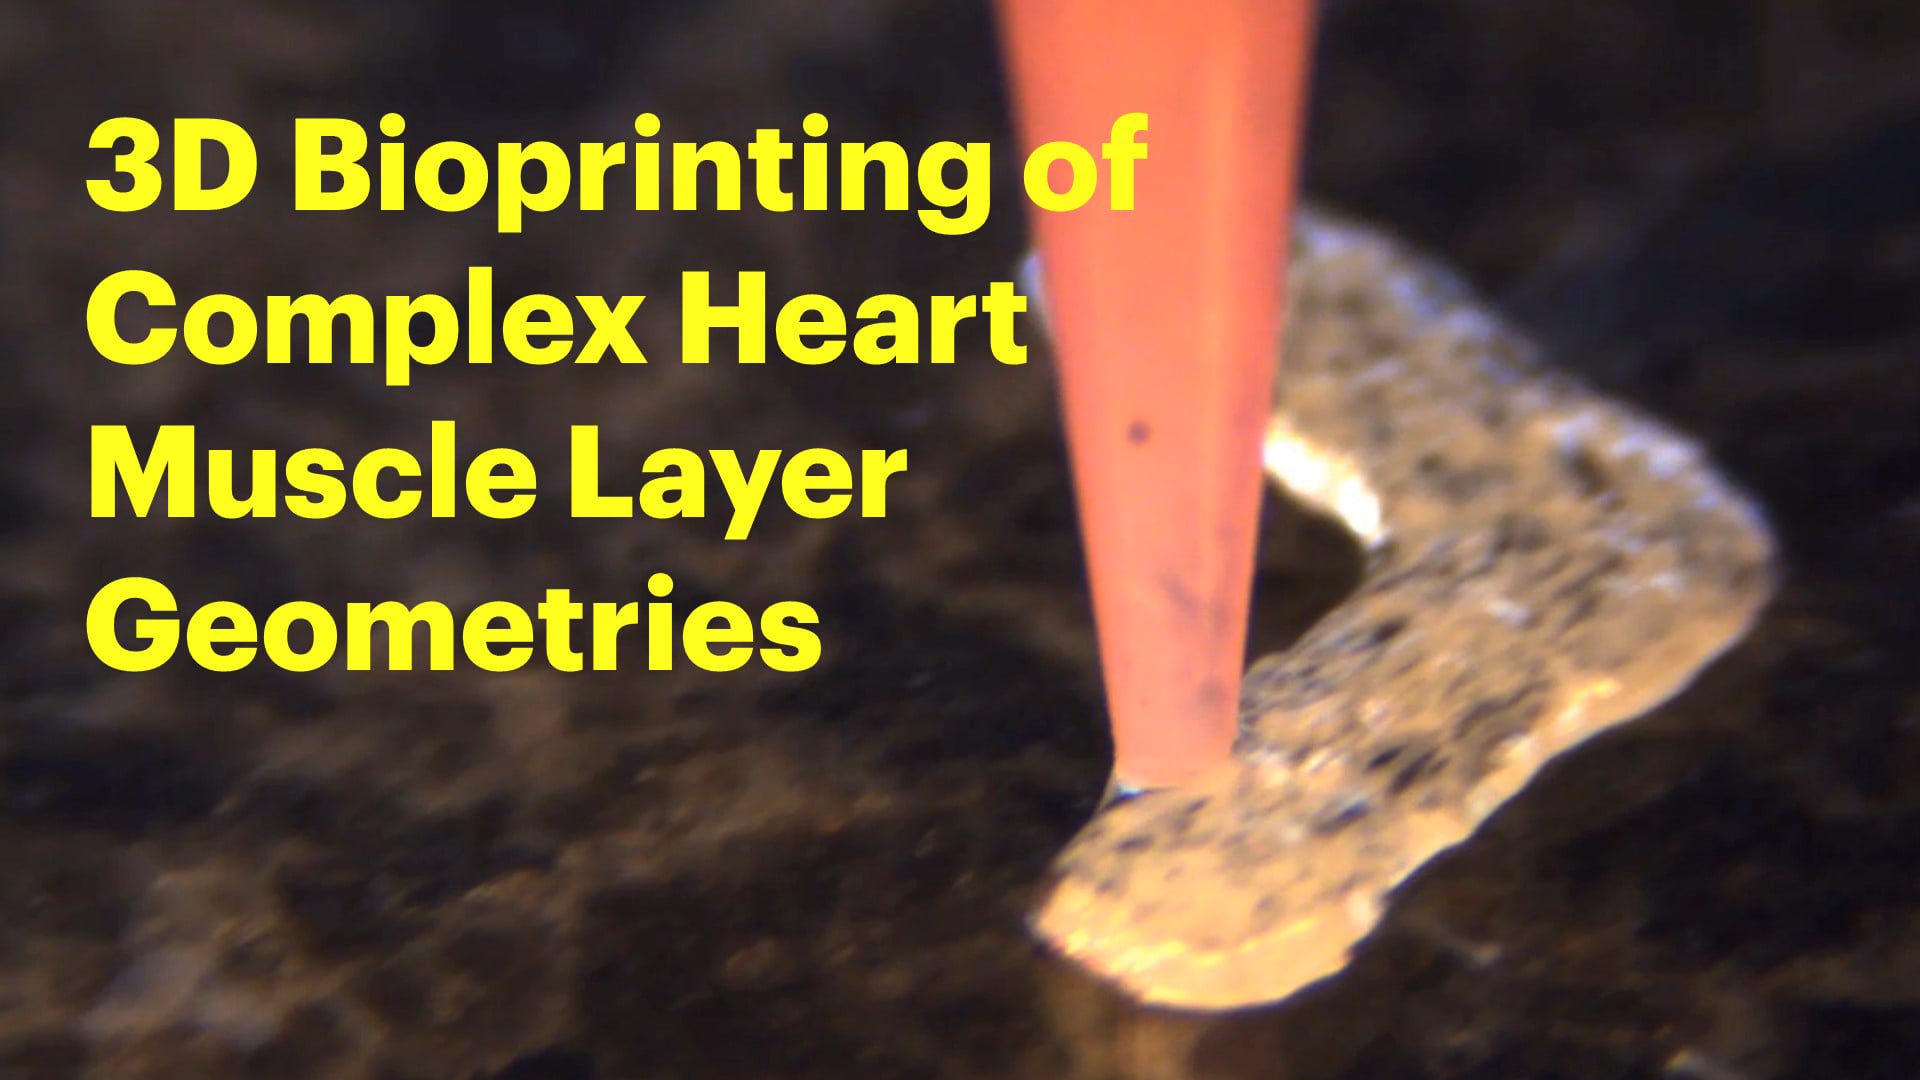 3D Bioprinting of complex heart muscle layer geometries.mp4